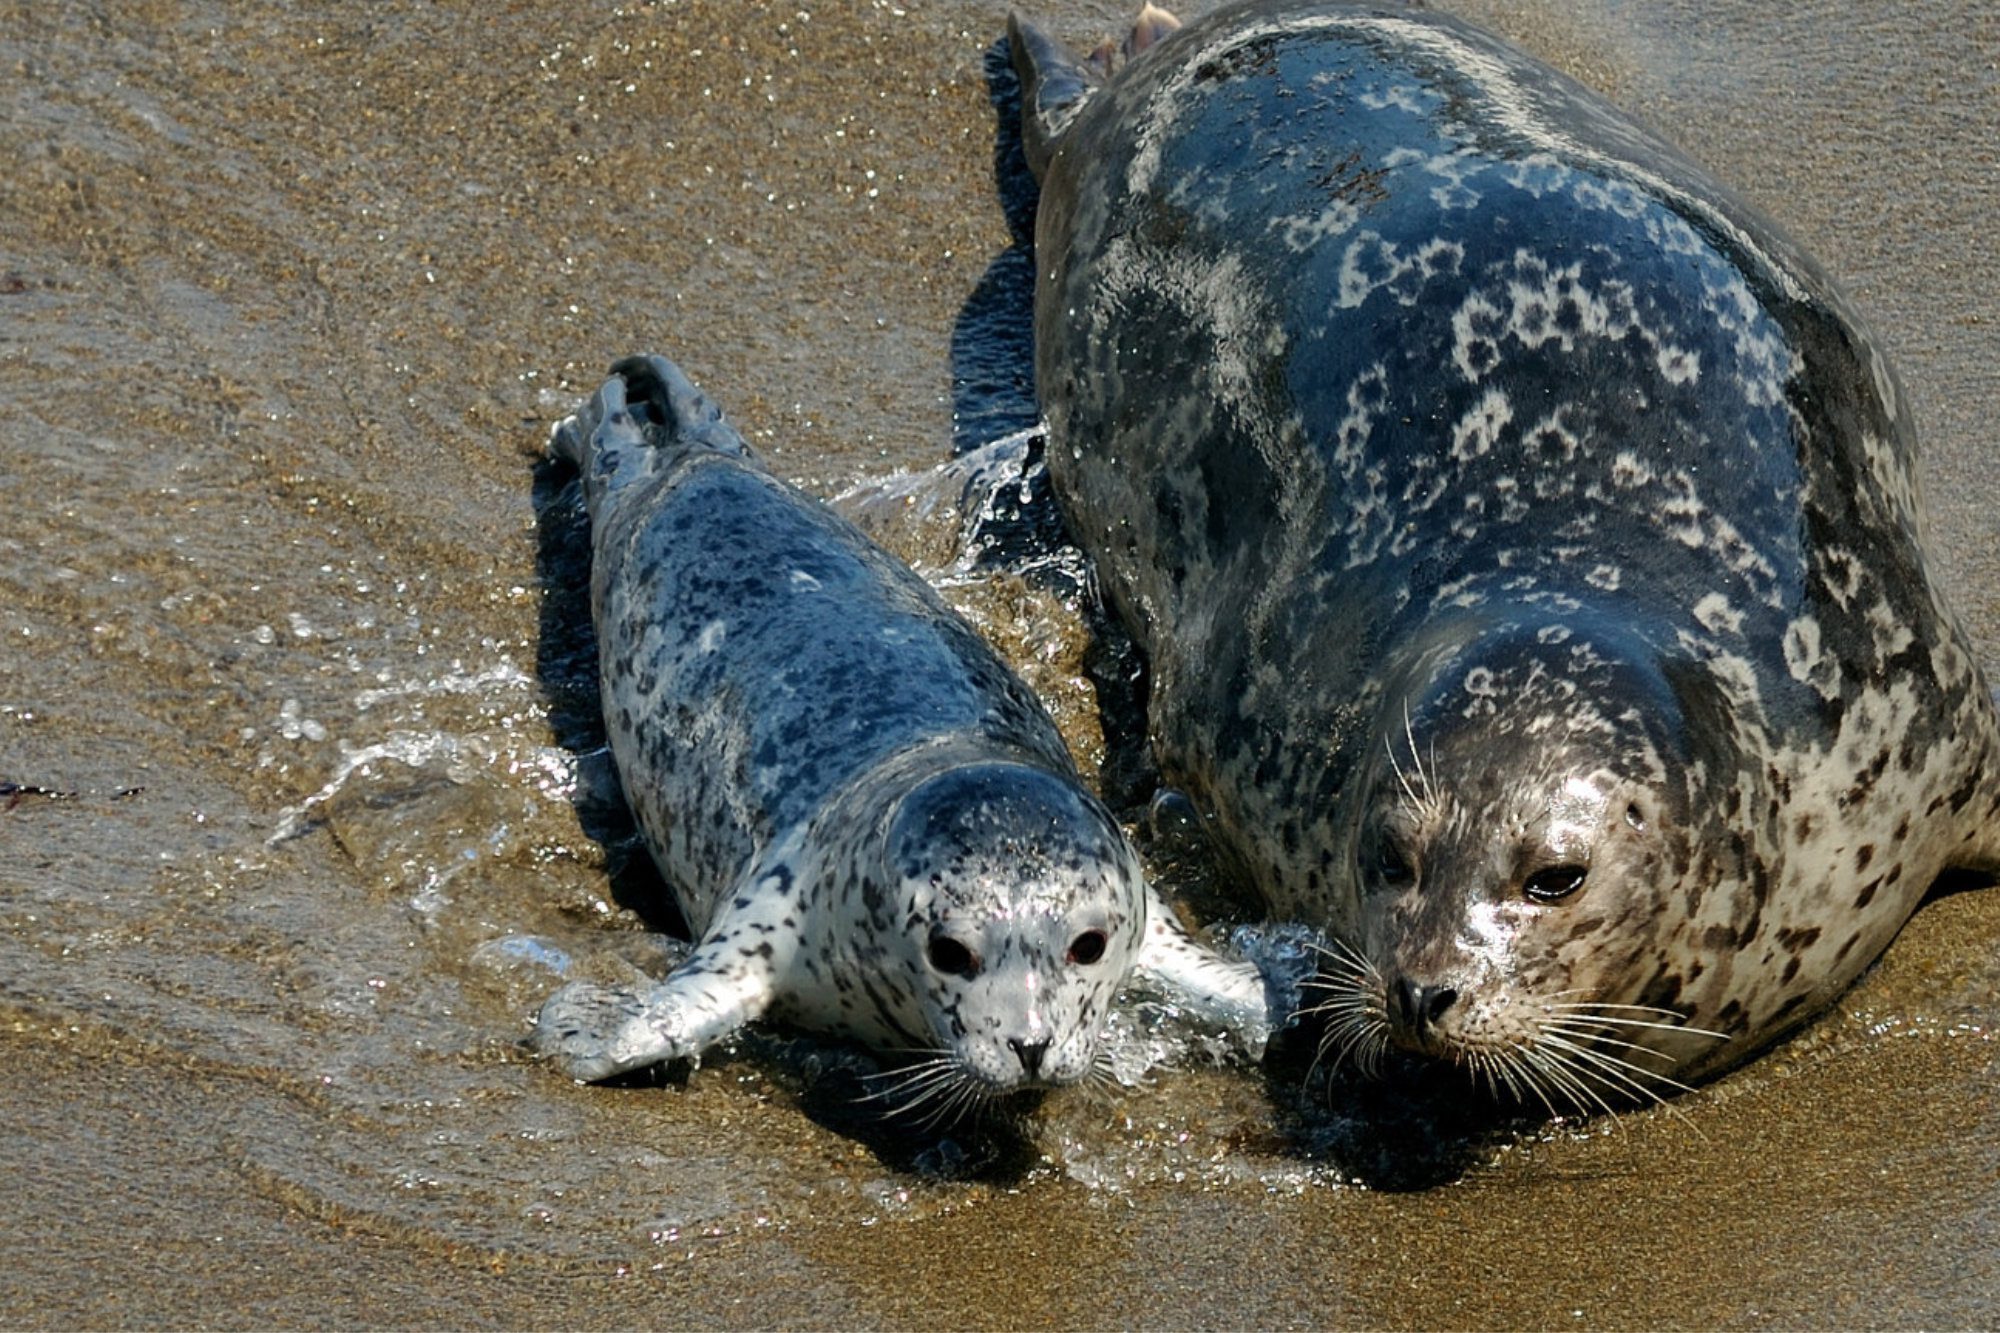 Parent seal and baby seal on beach